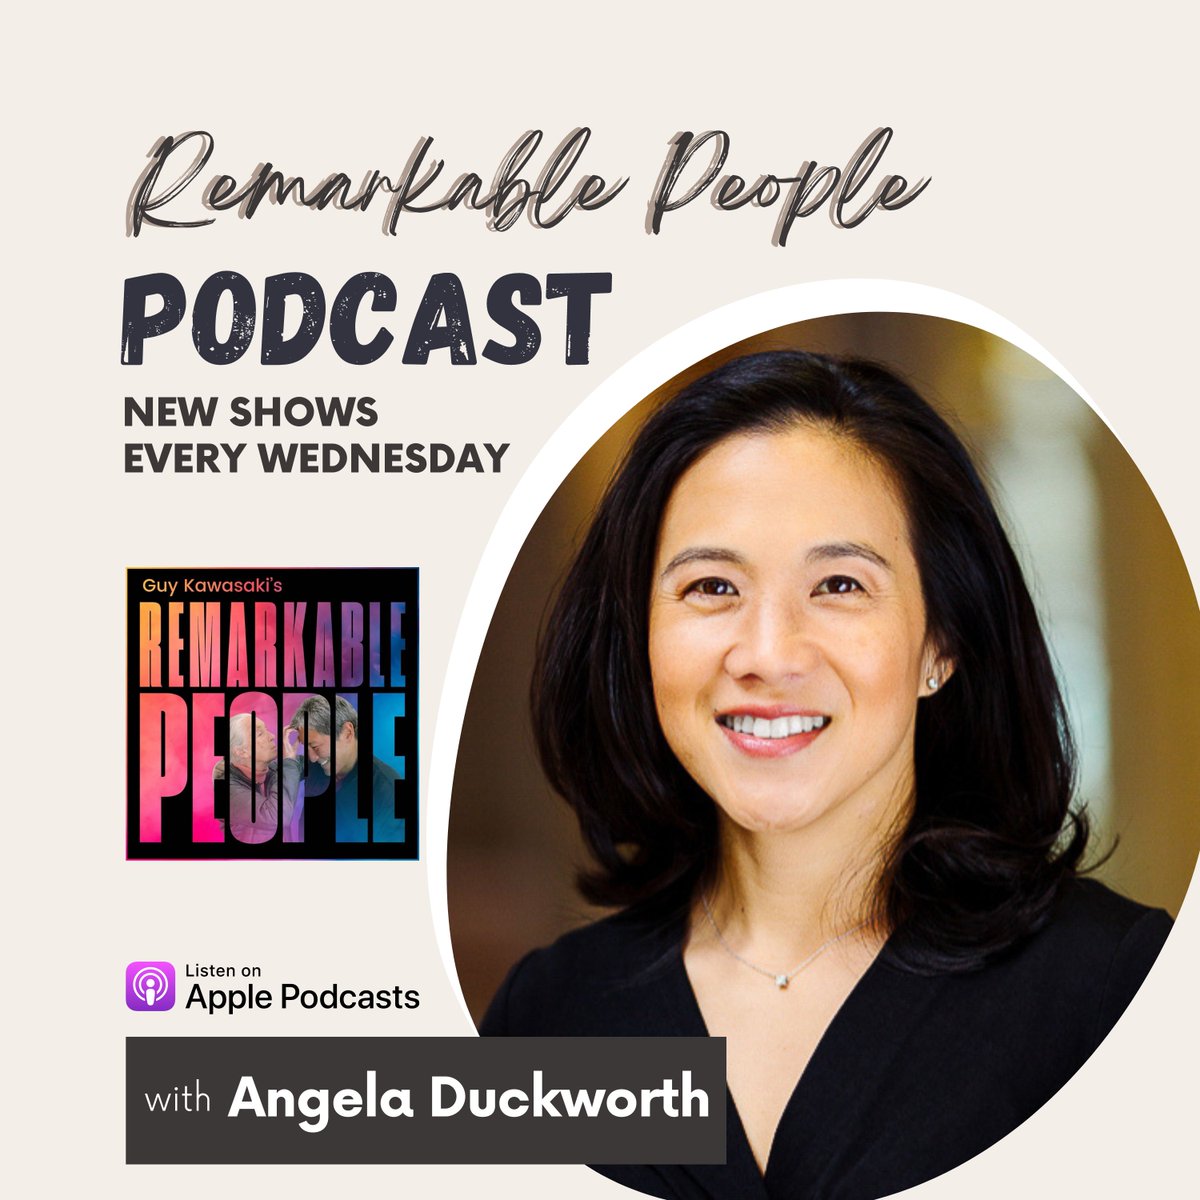 This week, psychology icon Angela Duckworth returns to the podcast! 🧠 Tune in as she shares her latest wisdom on understanding ourselves in order to grow: bit.ly/4alHj1e